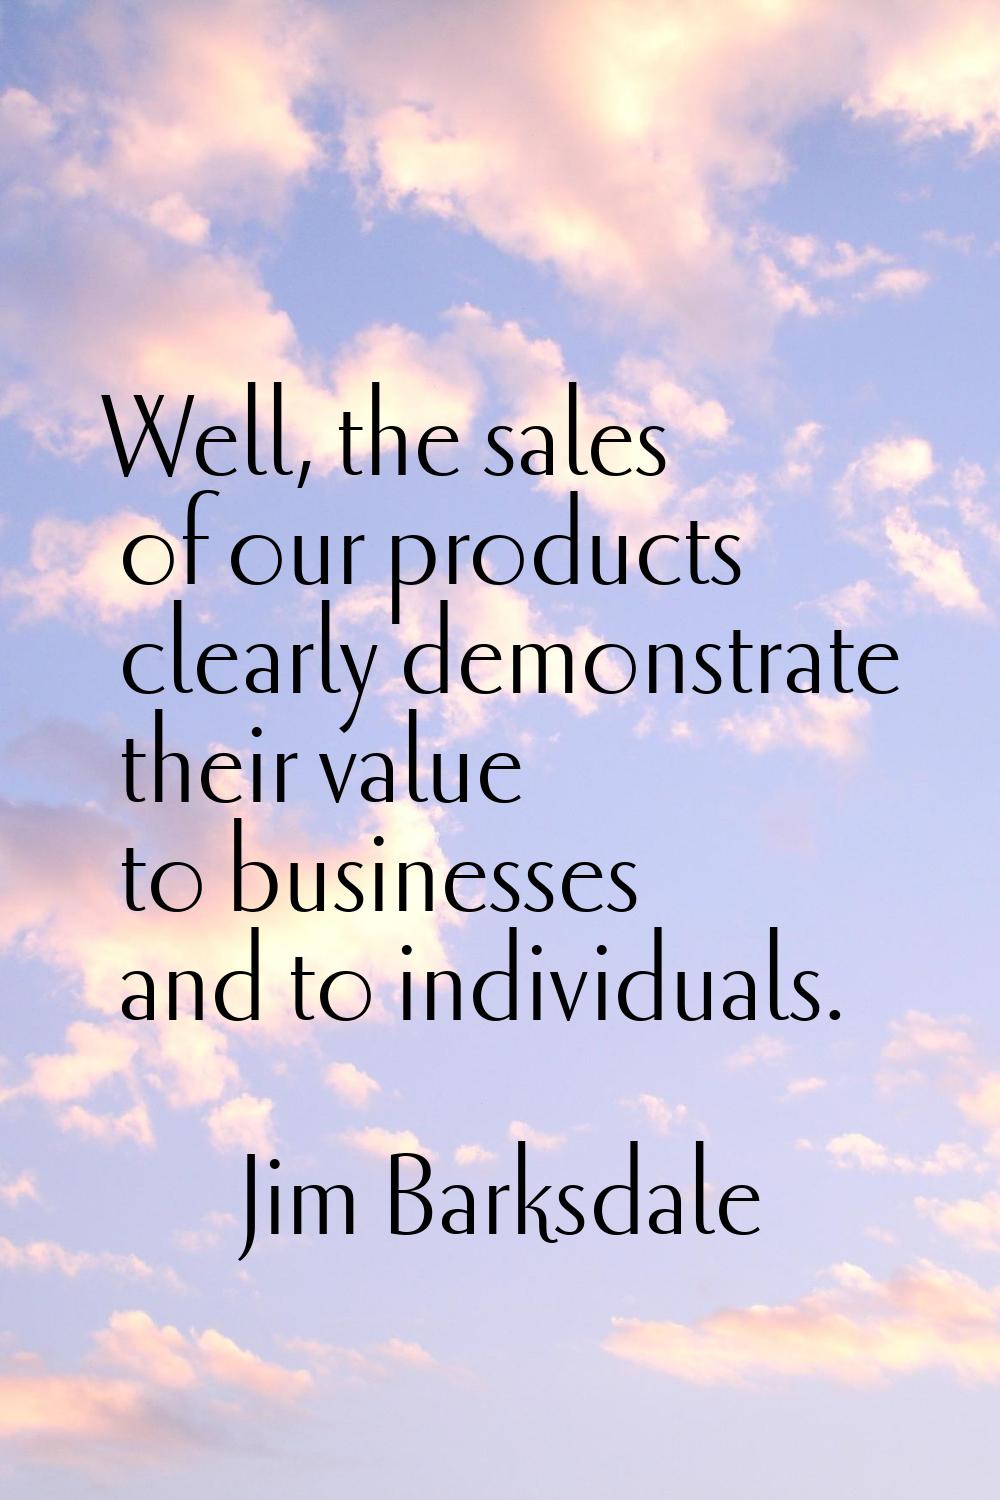 Well, the sales of our products clearly demonstrate their value to businesses and to individuals.